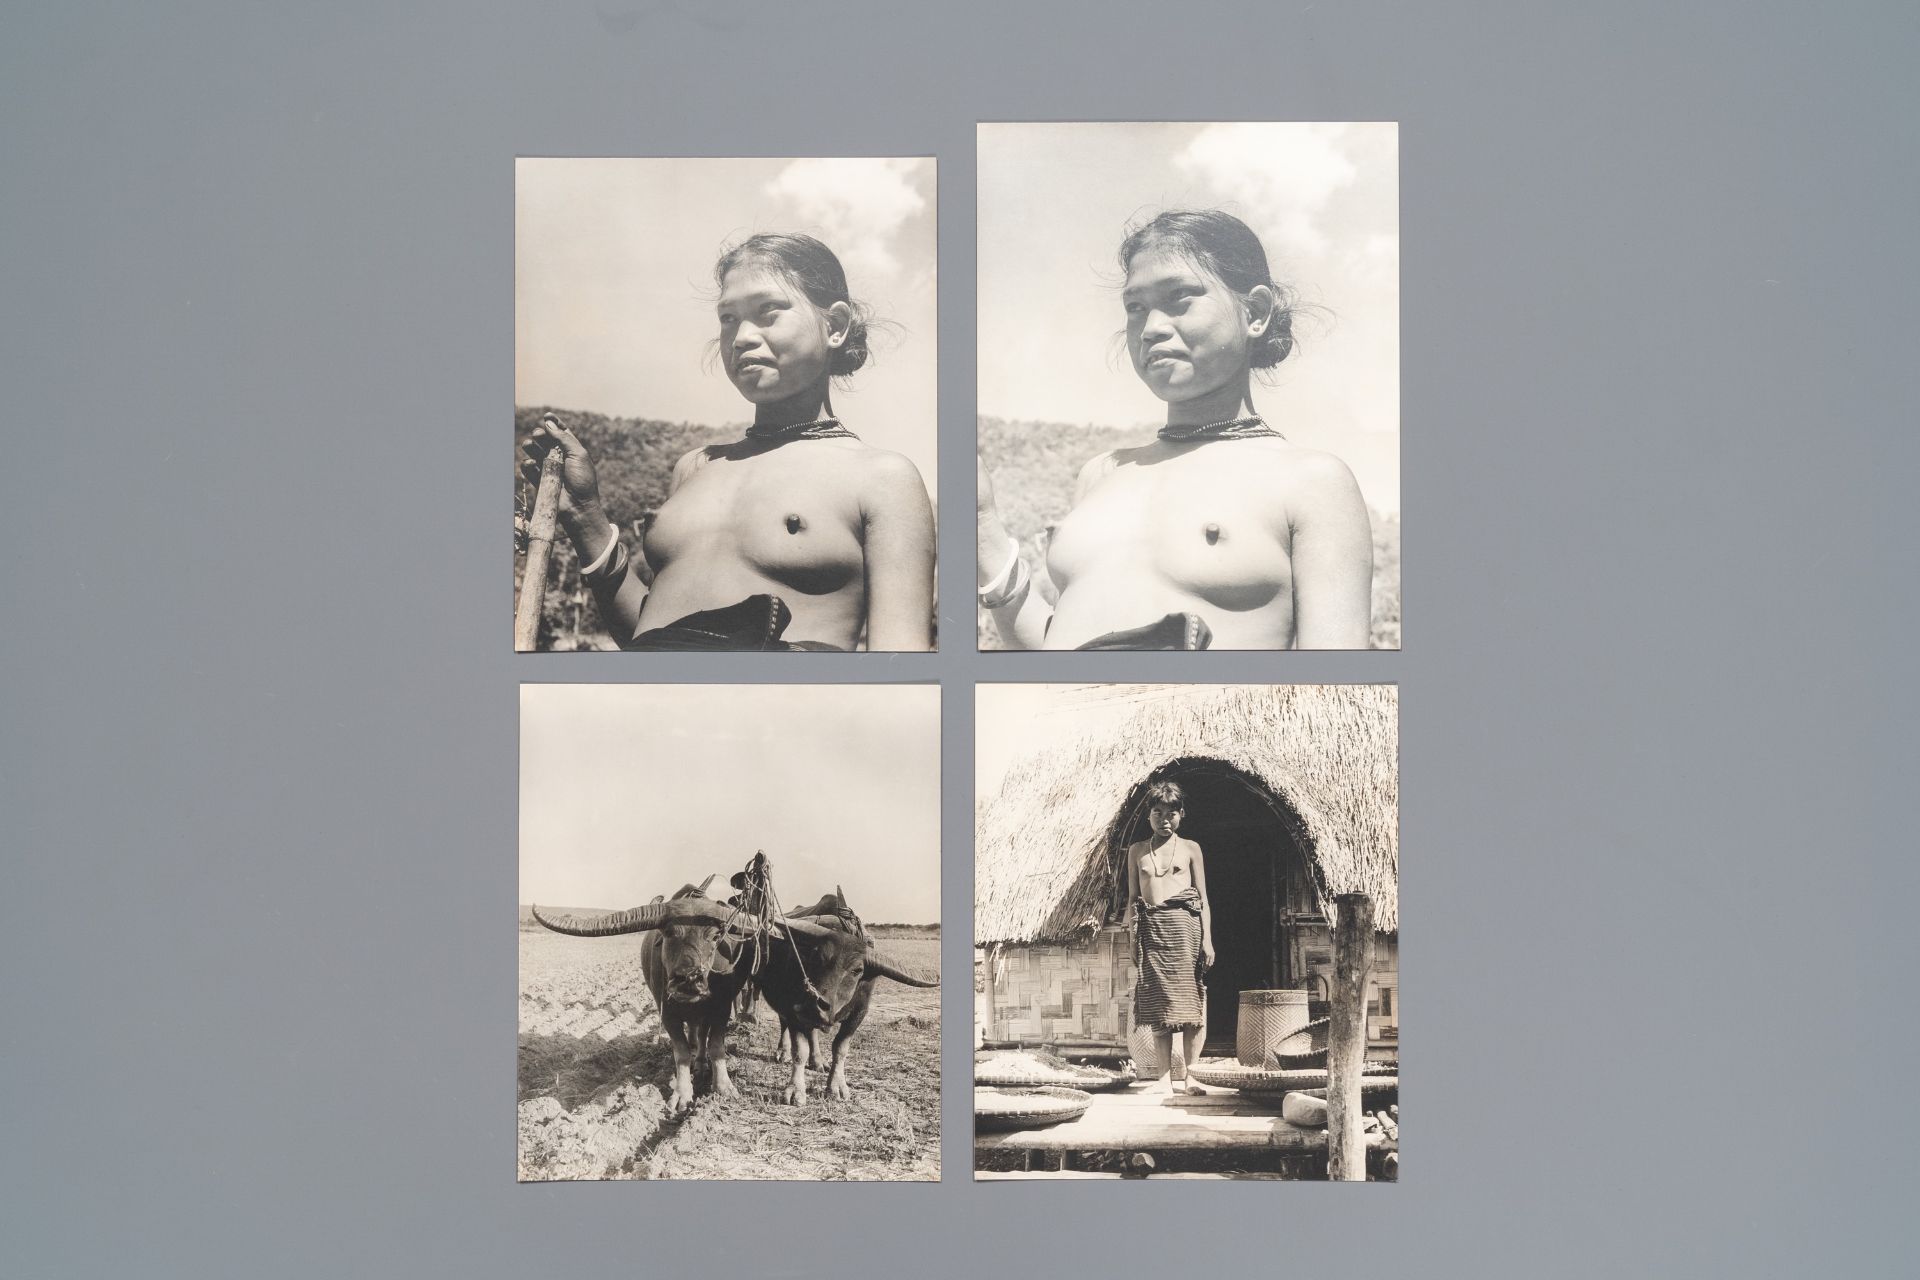 15 large black and white photos with indigenous people and landscape views, Vietnam, ca. 1900 - Image 4 of 5